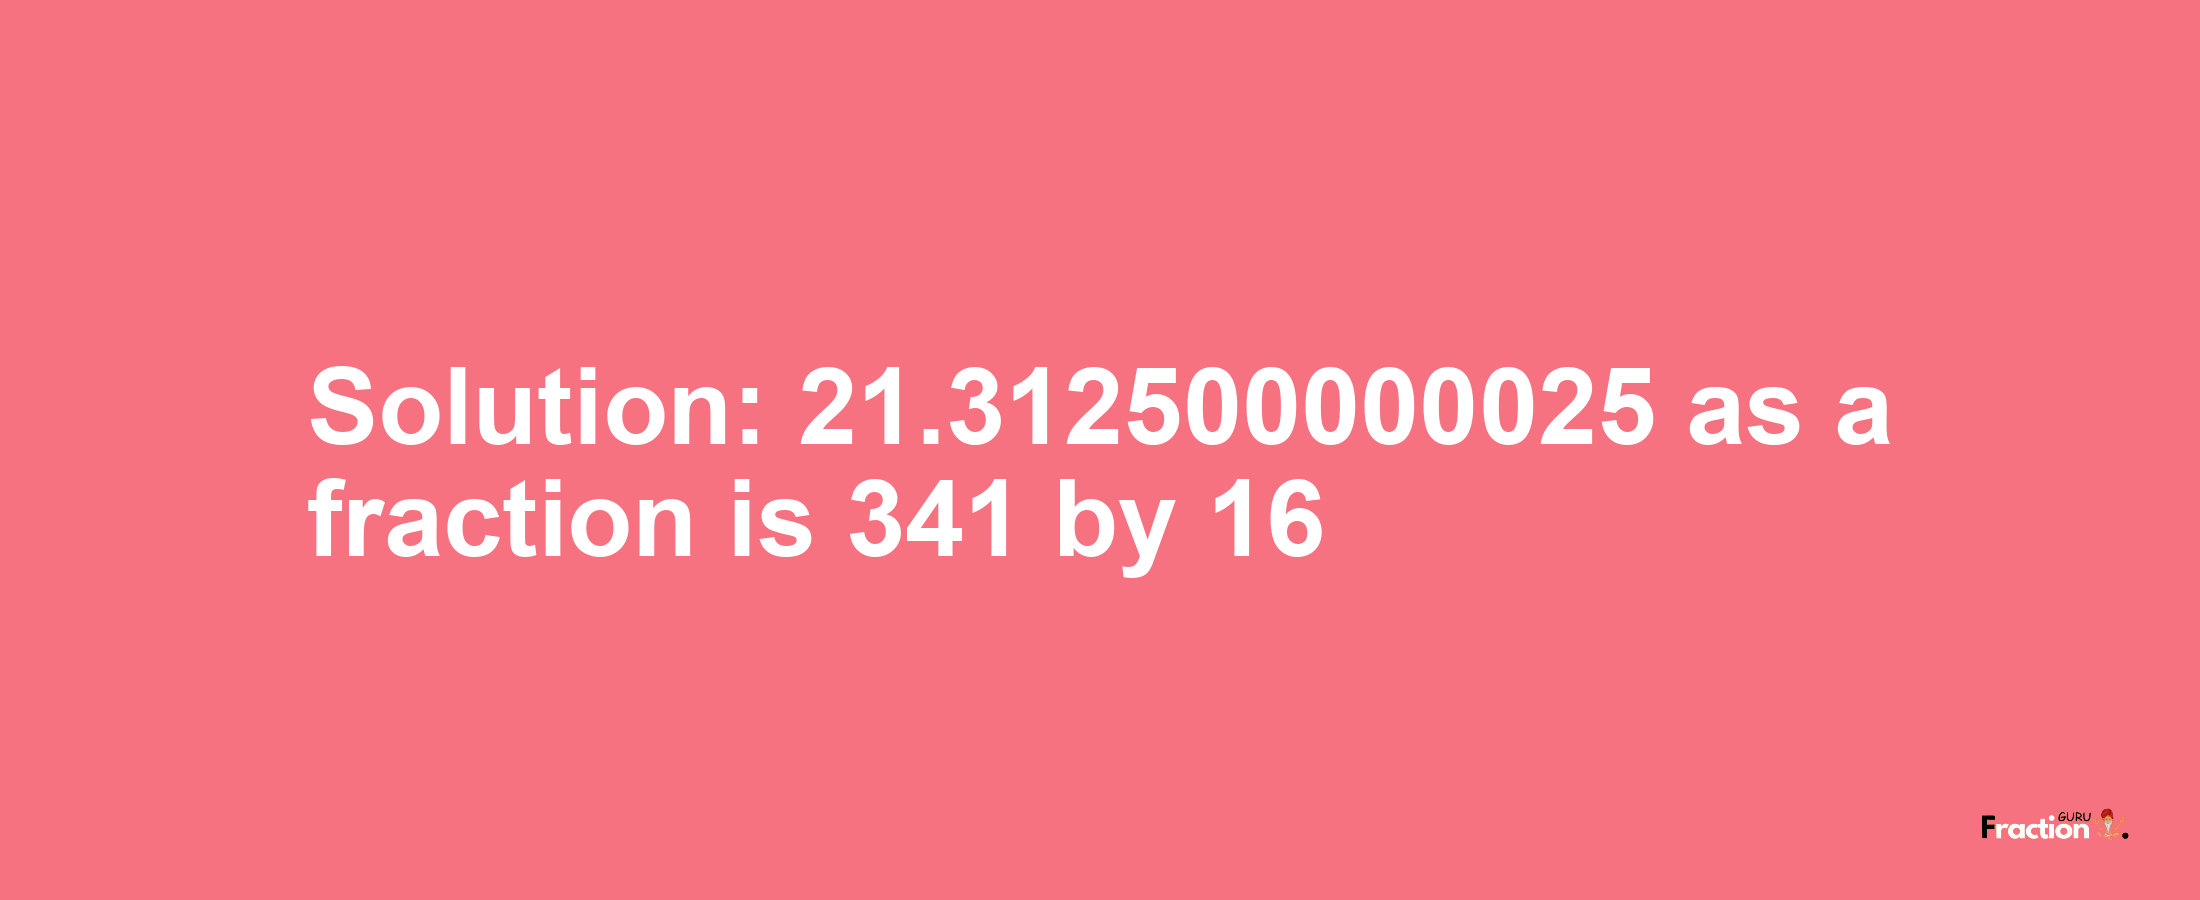 Solution:21.312500000025 as a fraction is 341/16